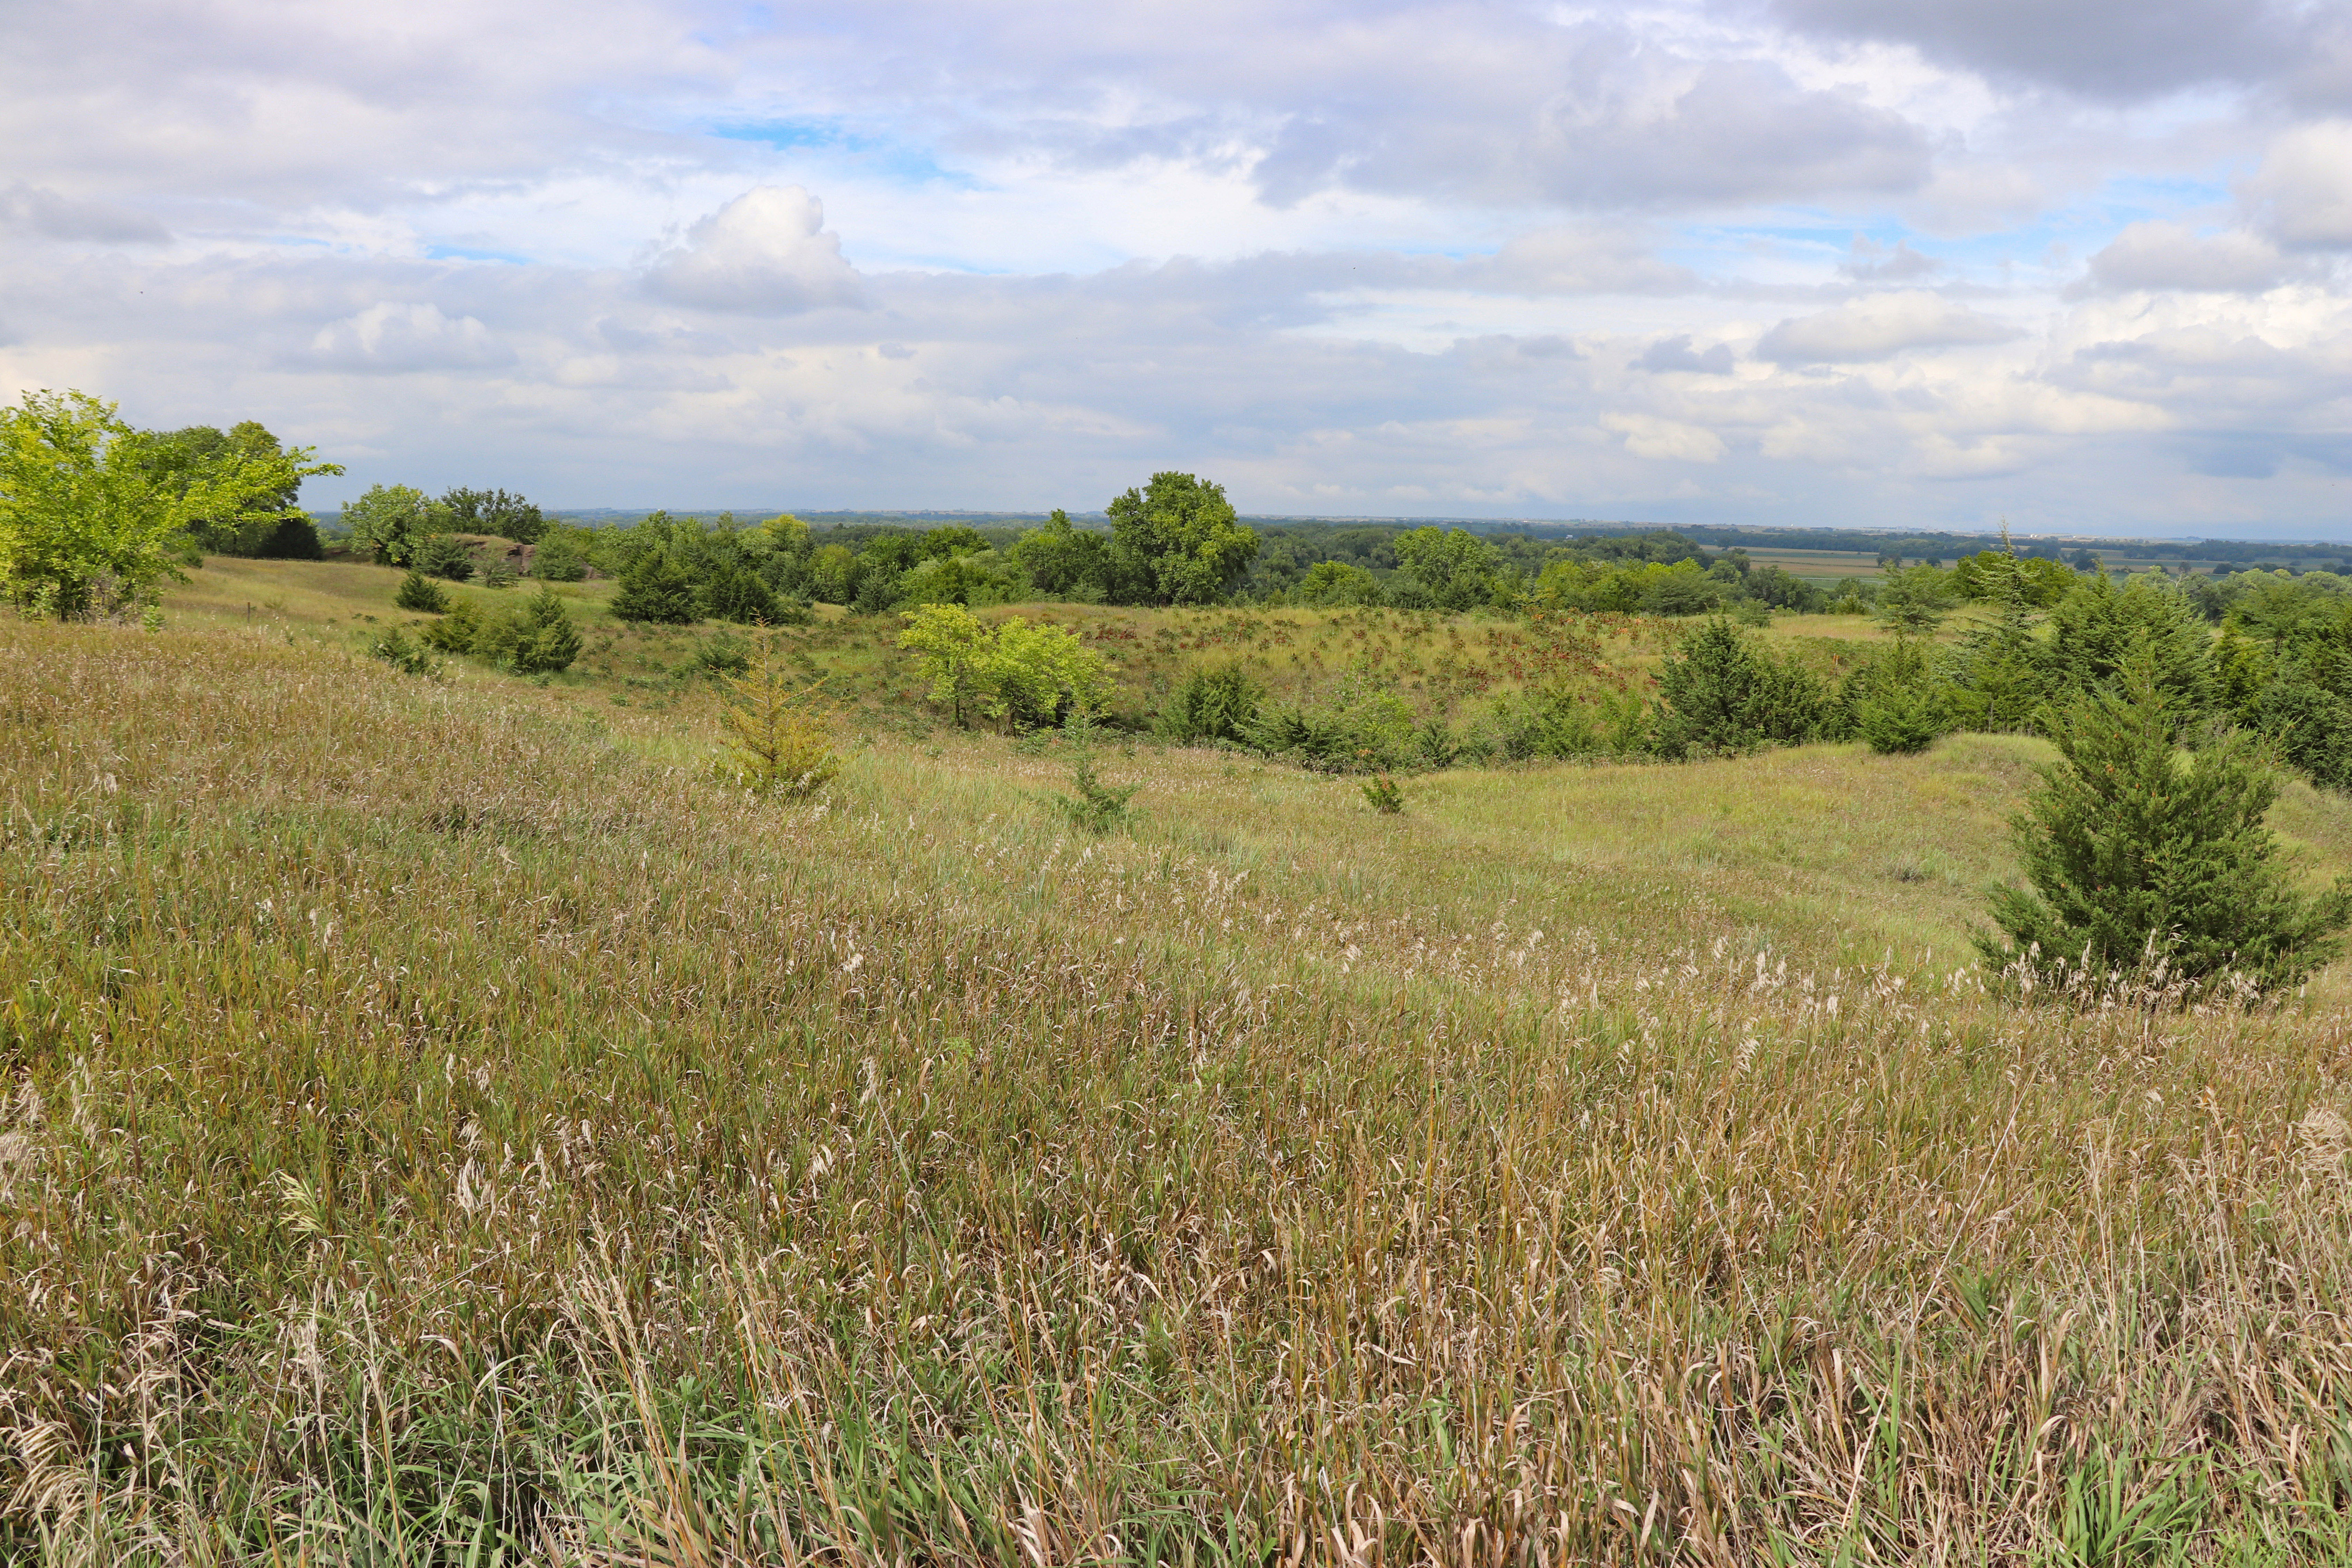 Low, rolling loess hills by the Pawnee Indian Museum.